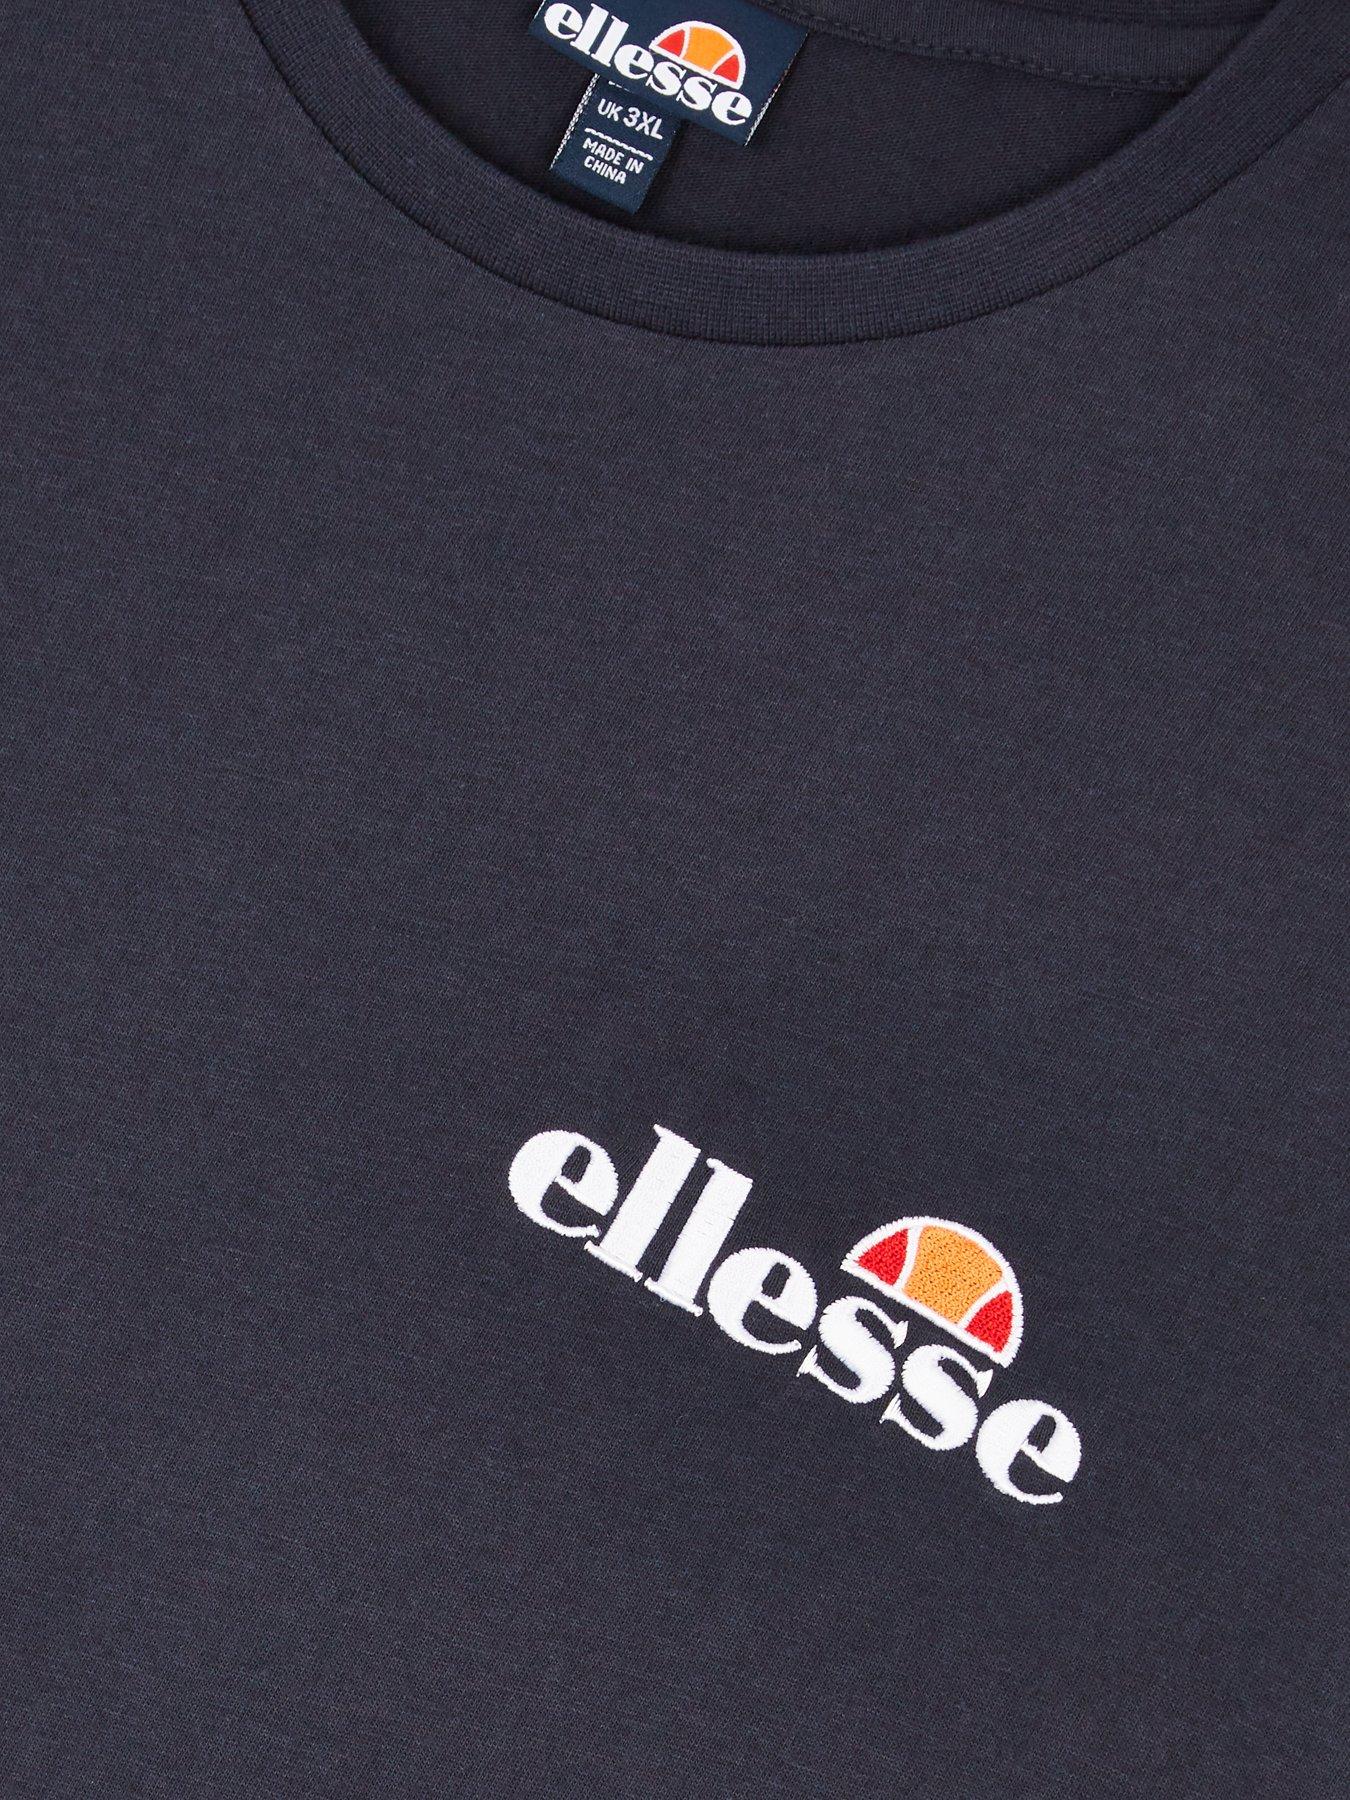 ellesse meaning in english